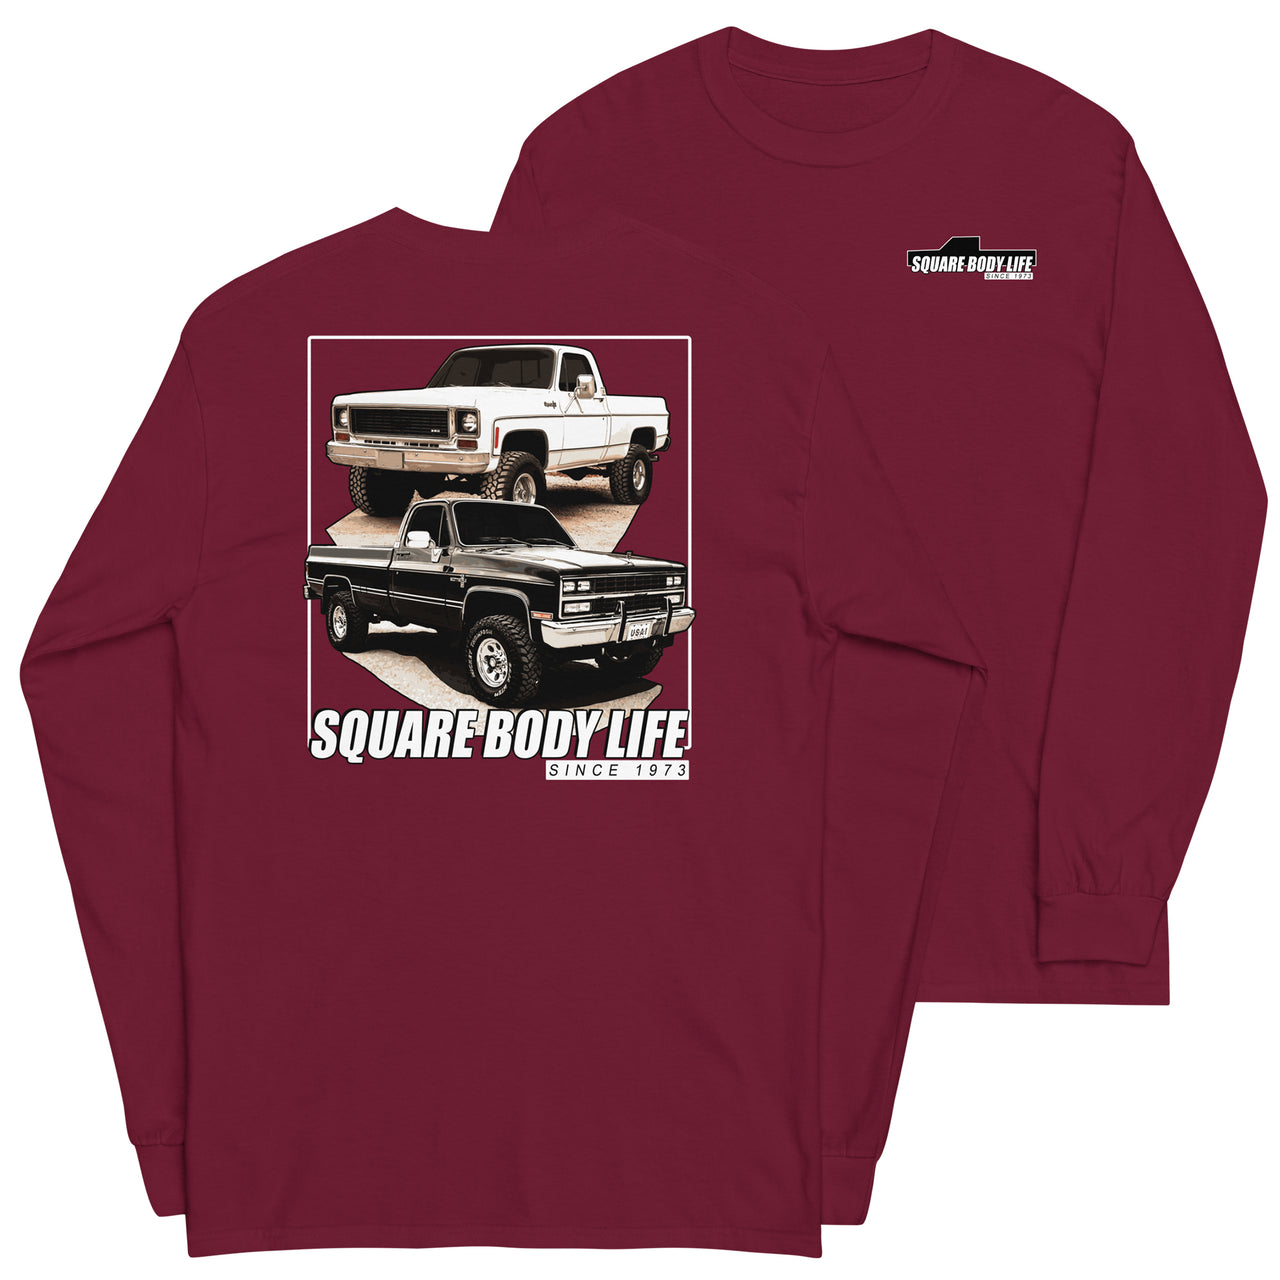 Square Body Life Long Sleeve T-Shirt in maroon